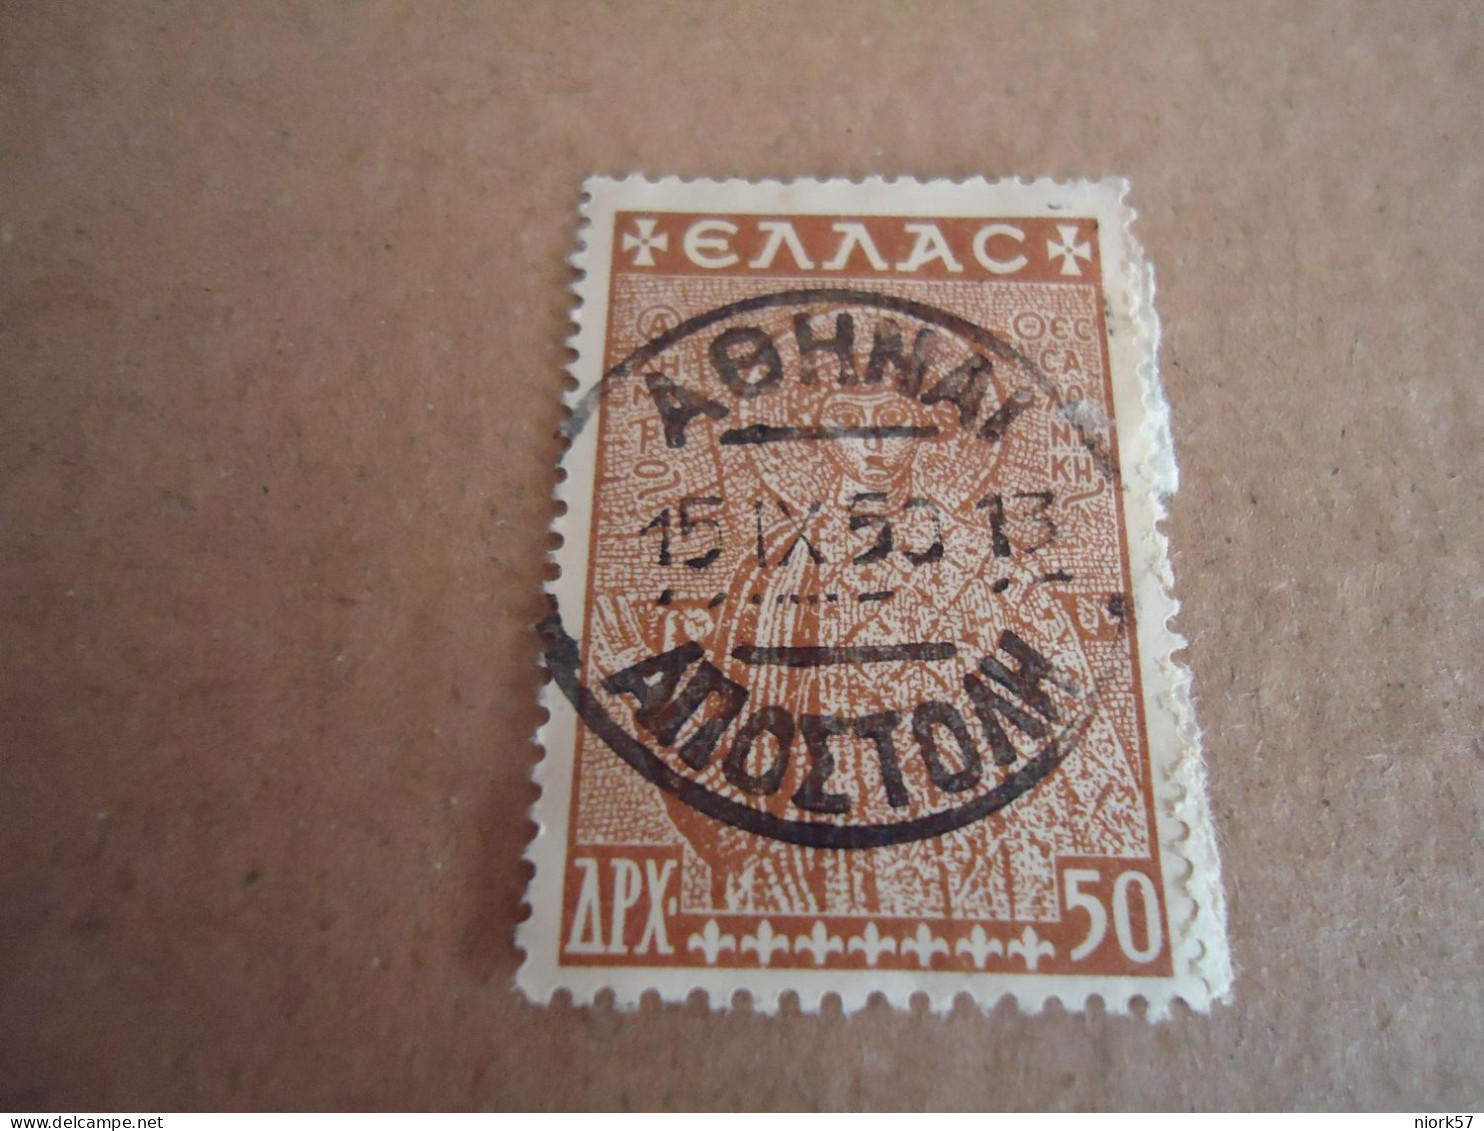 GREECE   POSTMARK ON STAMPS   ΑΘΗΝΑΙ ΑΠΟΣΤΟΛΗ 1953/13 - Marcophilie - EMA (Empreintes Machines)